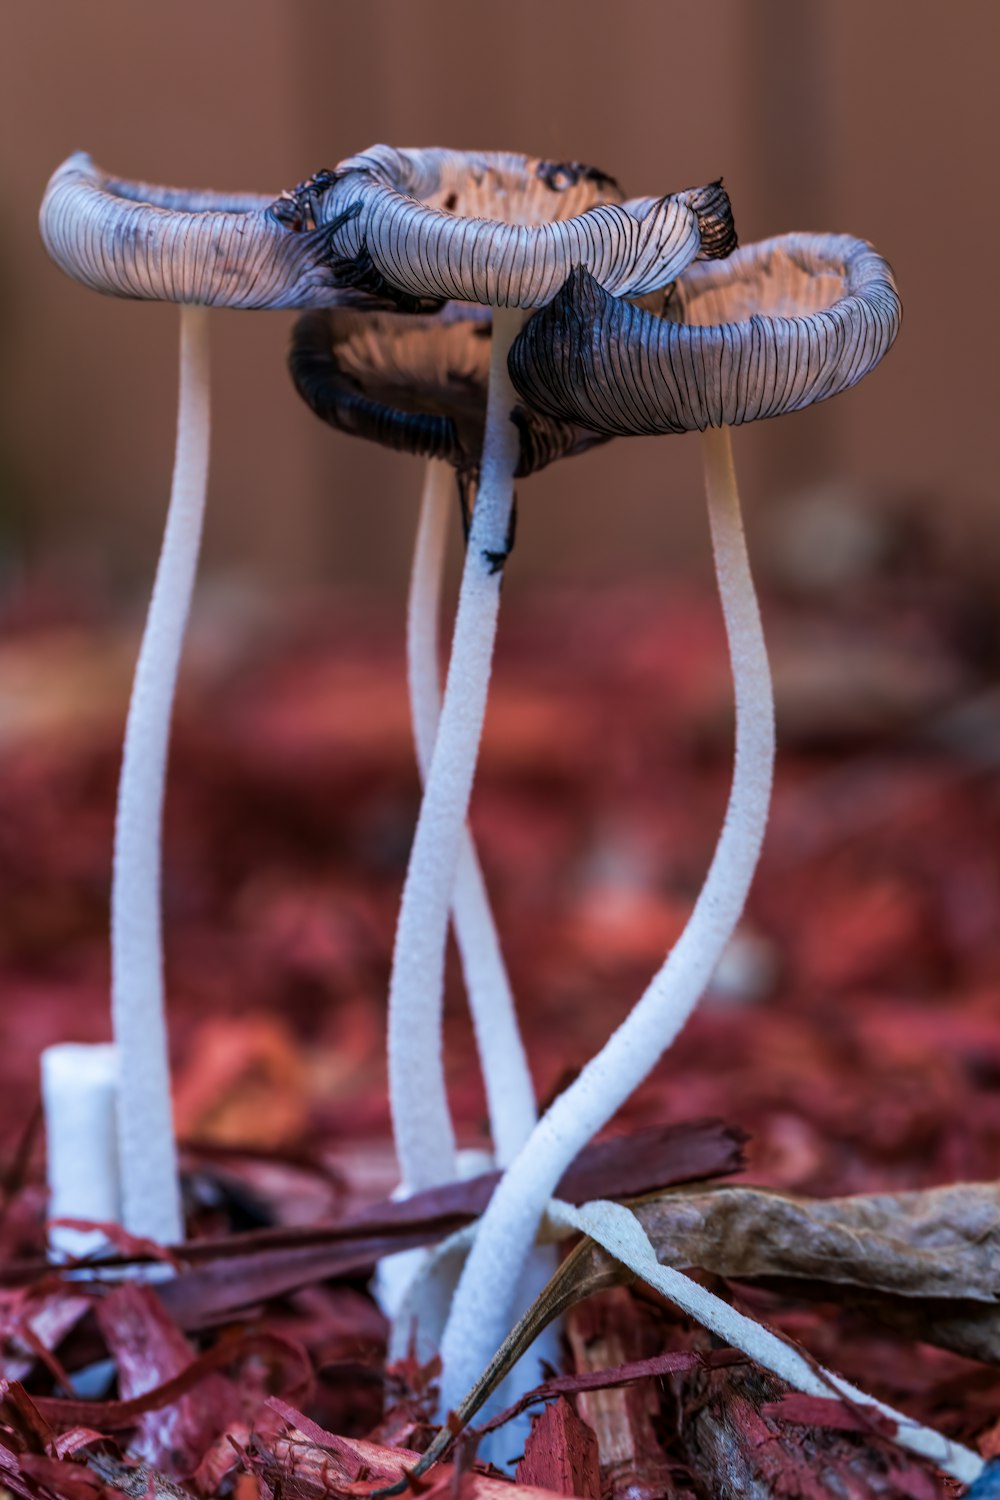 a close up of two mushrooms on a bed of leaves